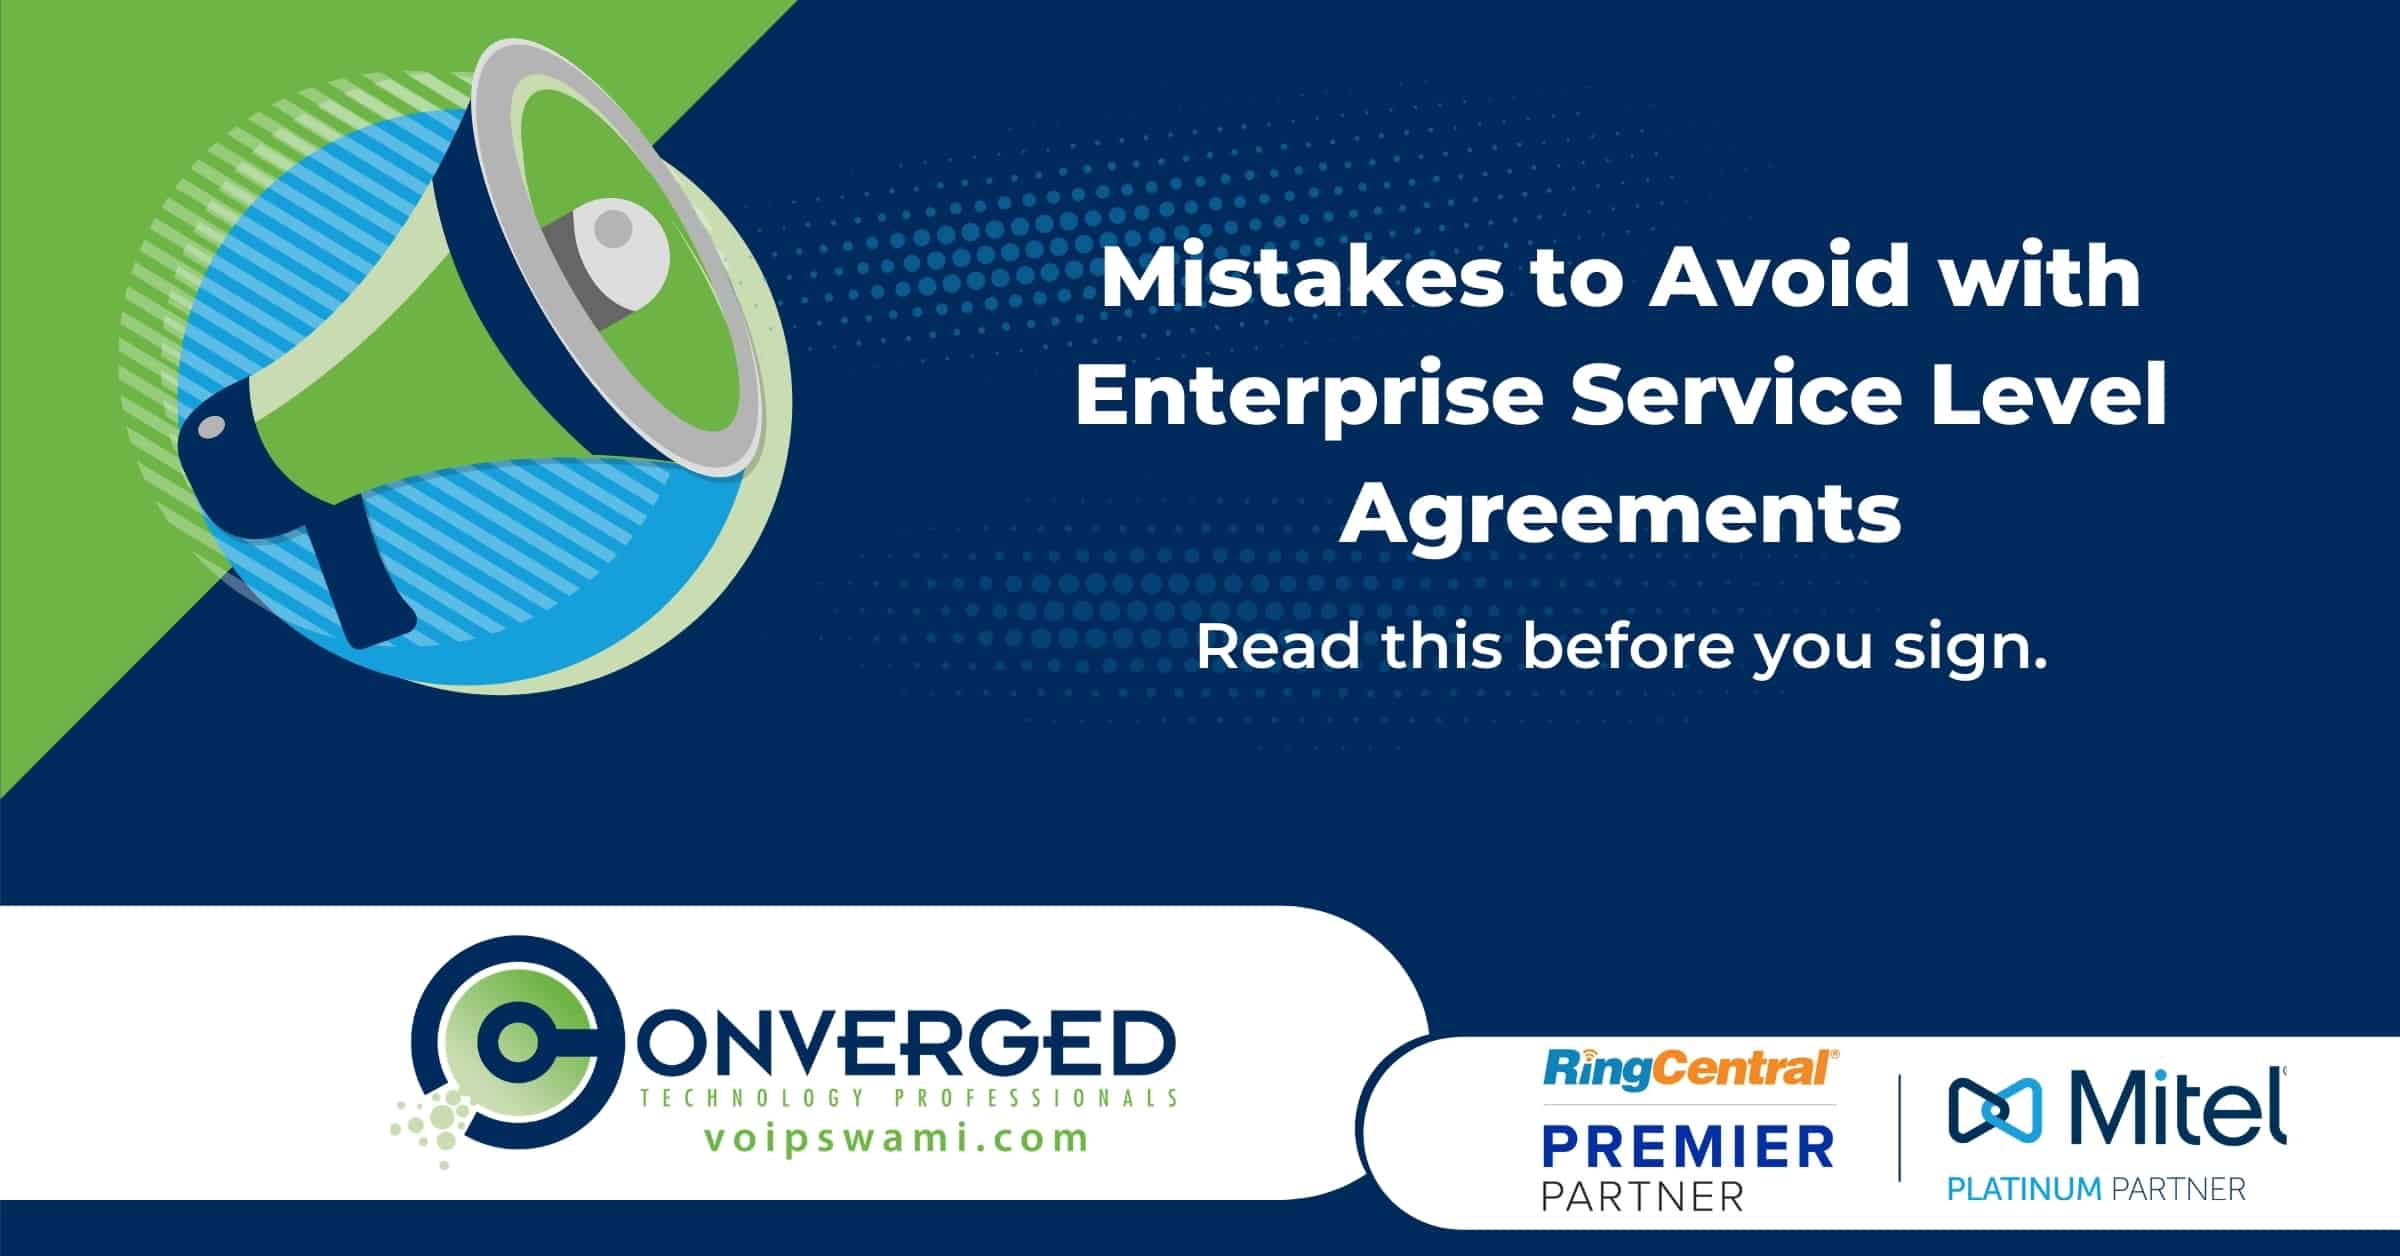 Mistakes to Avoid with Enterprise Service Level Agreements